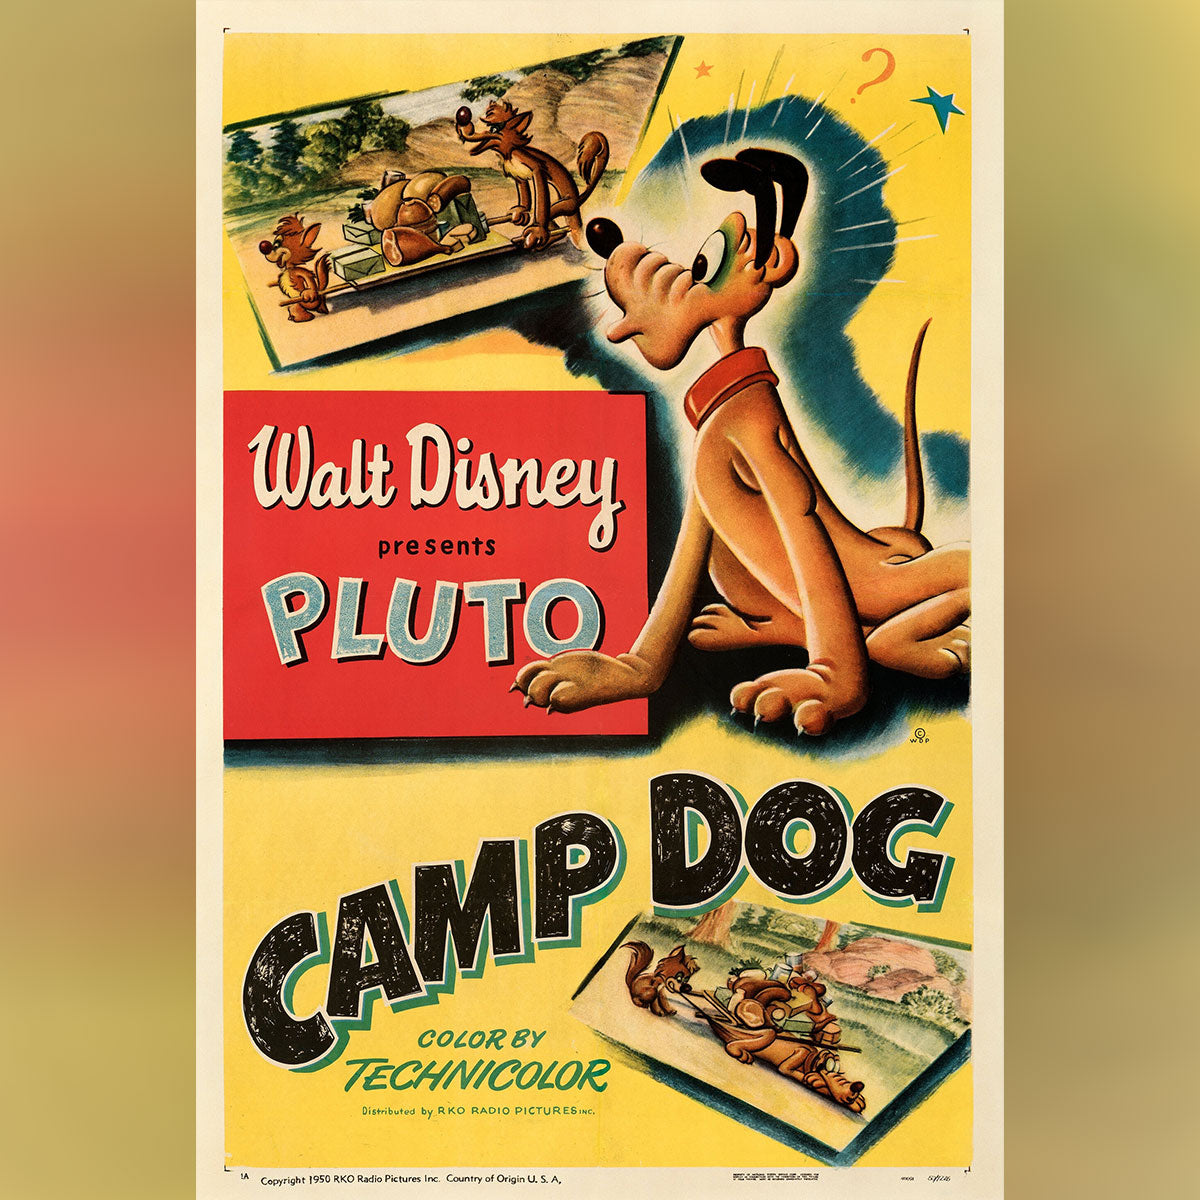 Pluto in Camp Dog (1950)